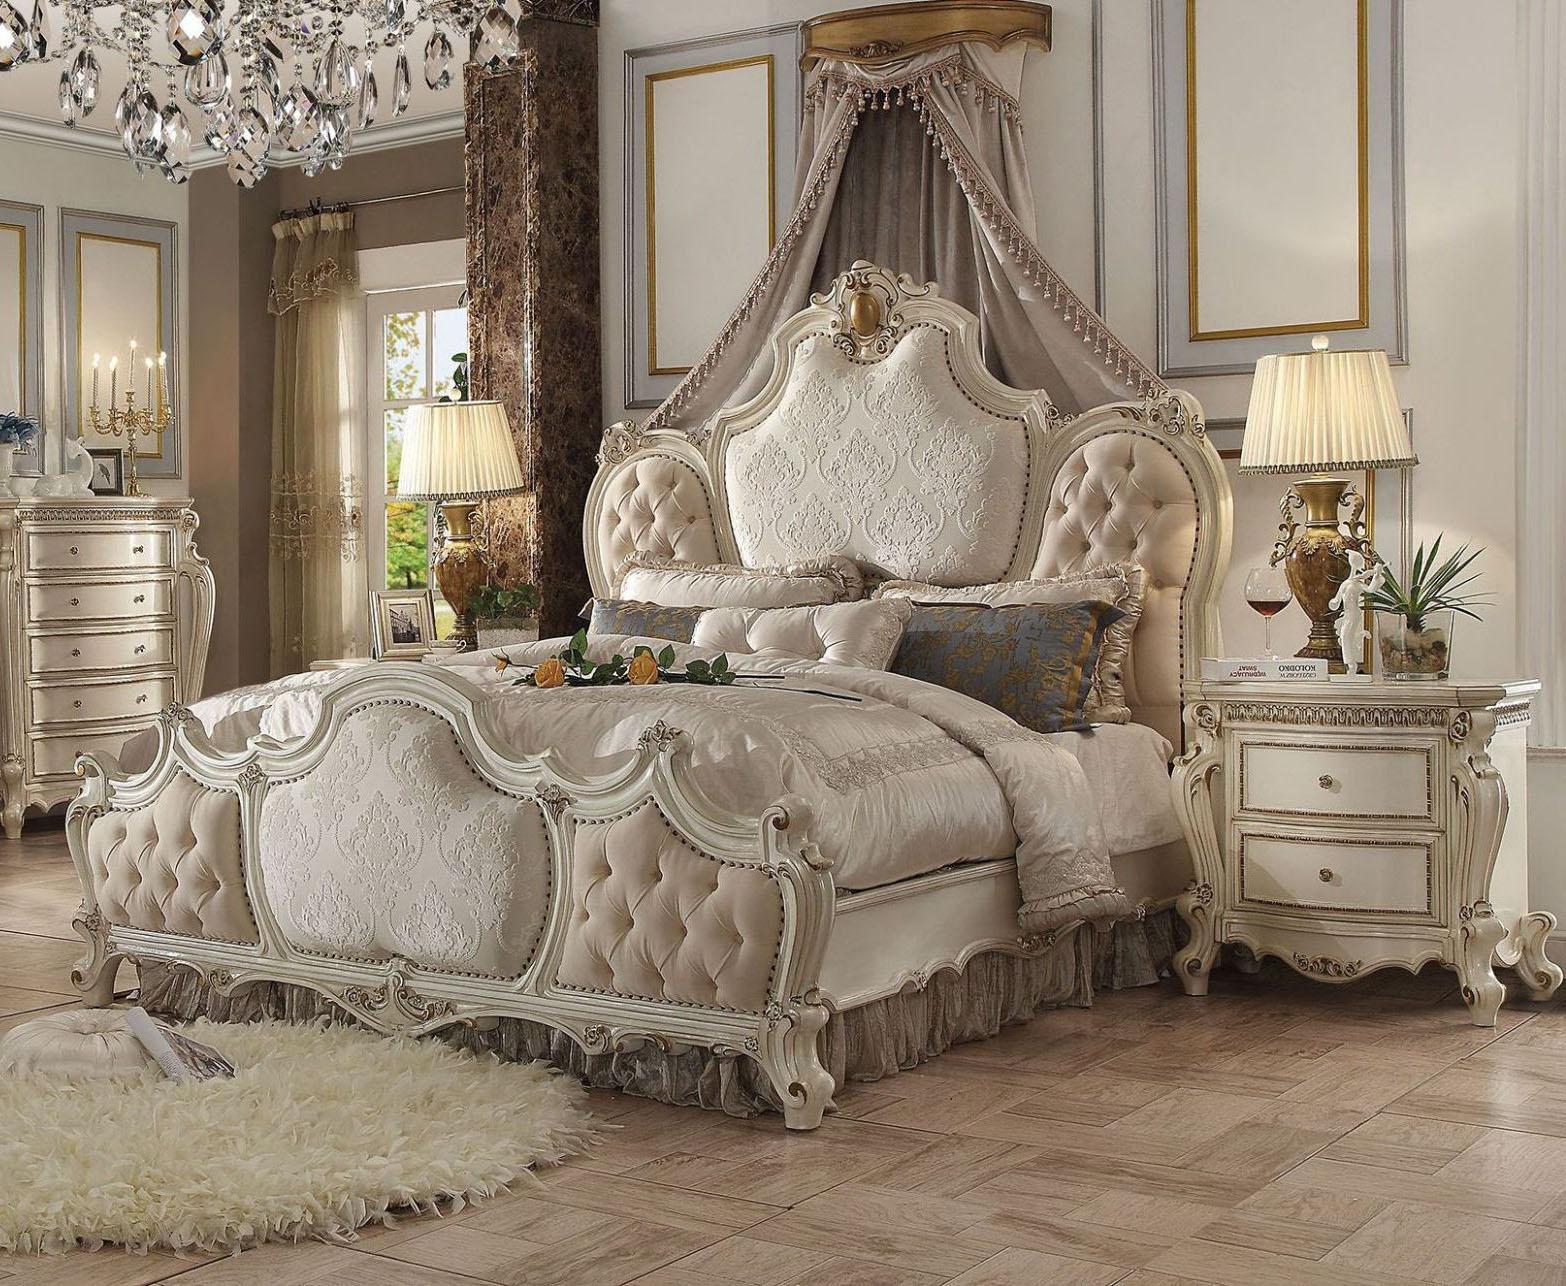 

    
Fabric Antique Pearl Tufted Queen Bedroom Set 3Pc Picardy 26880Q Acme Classic
